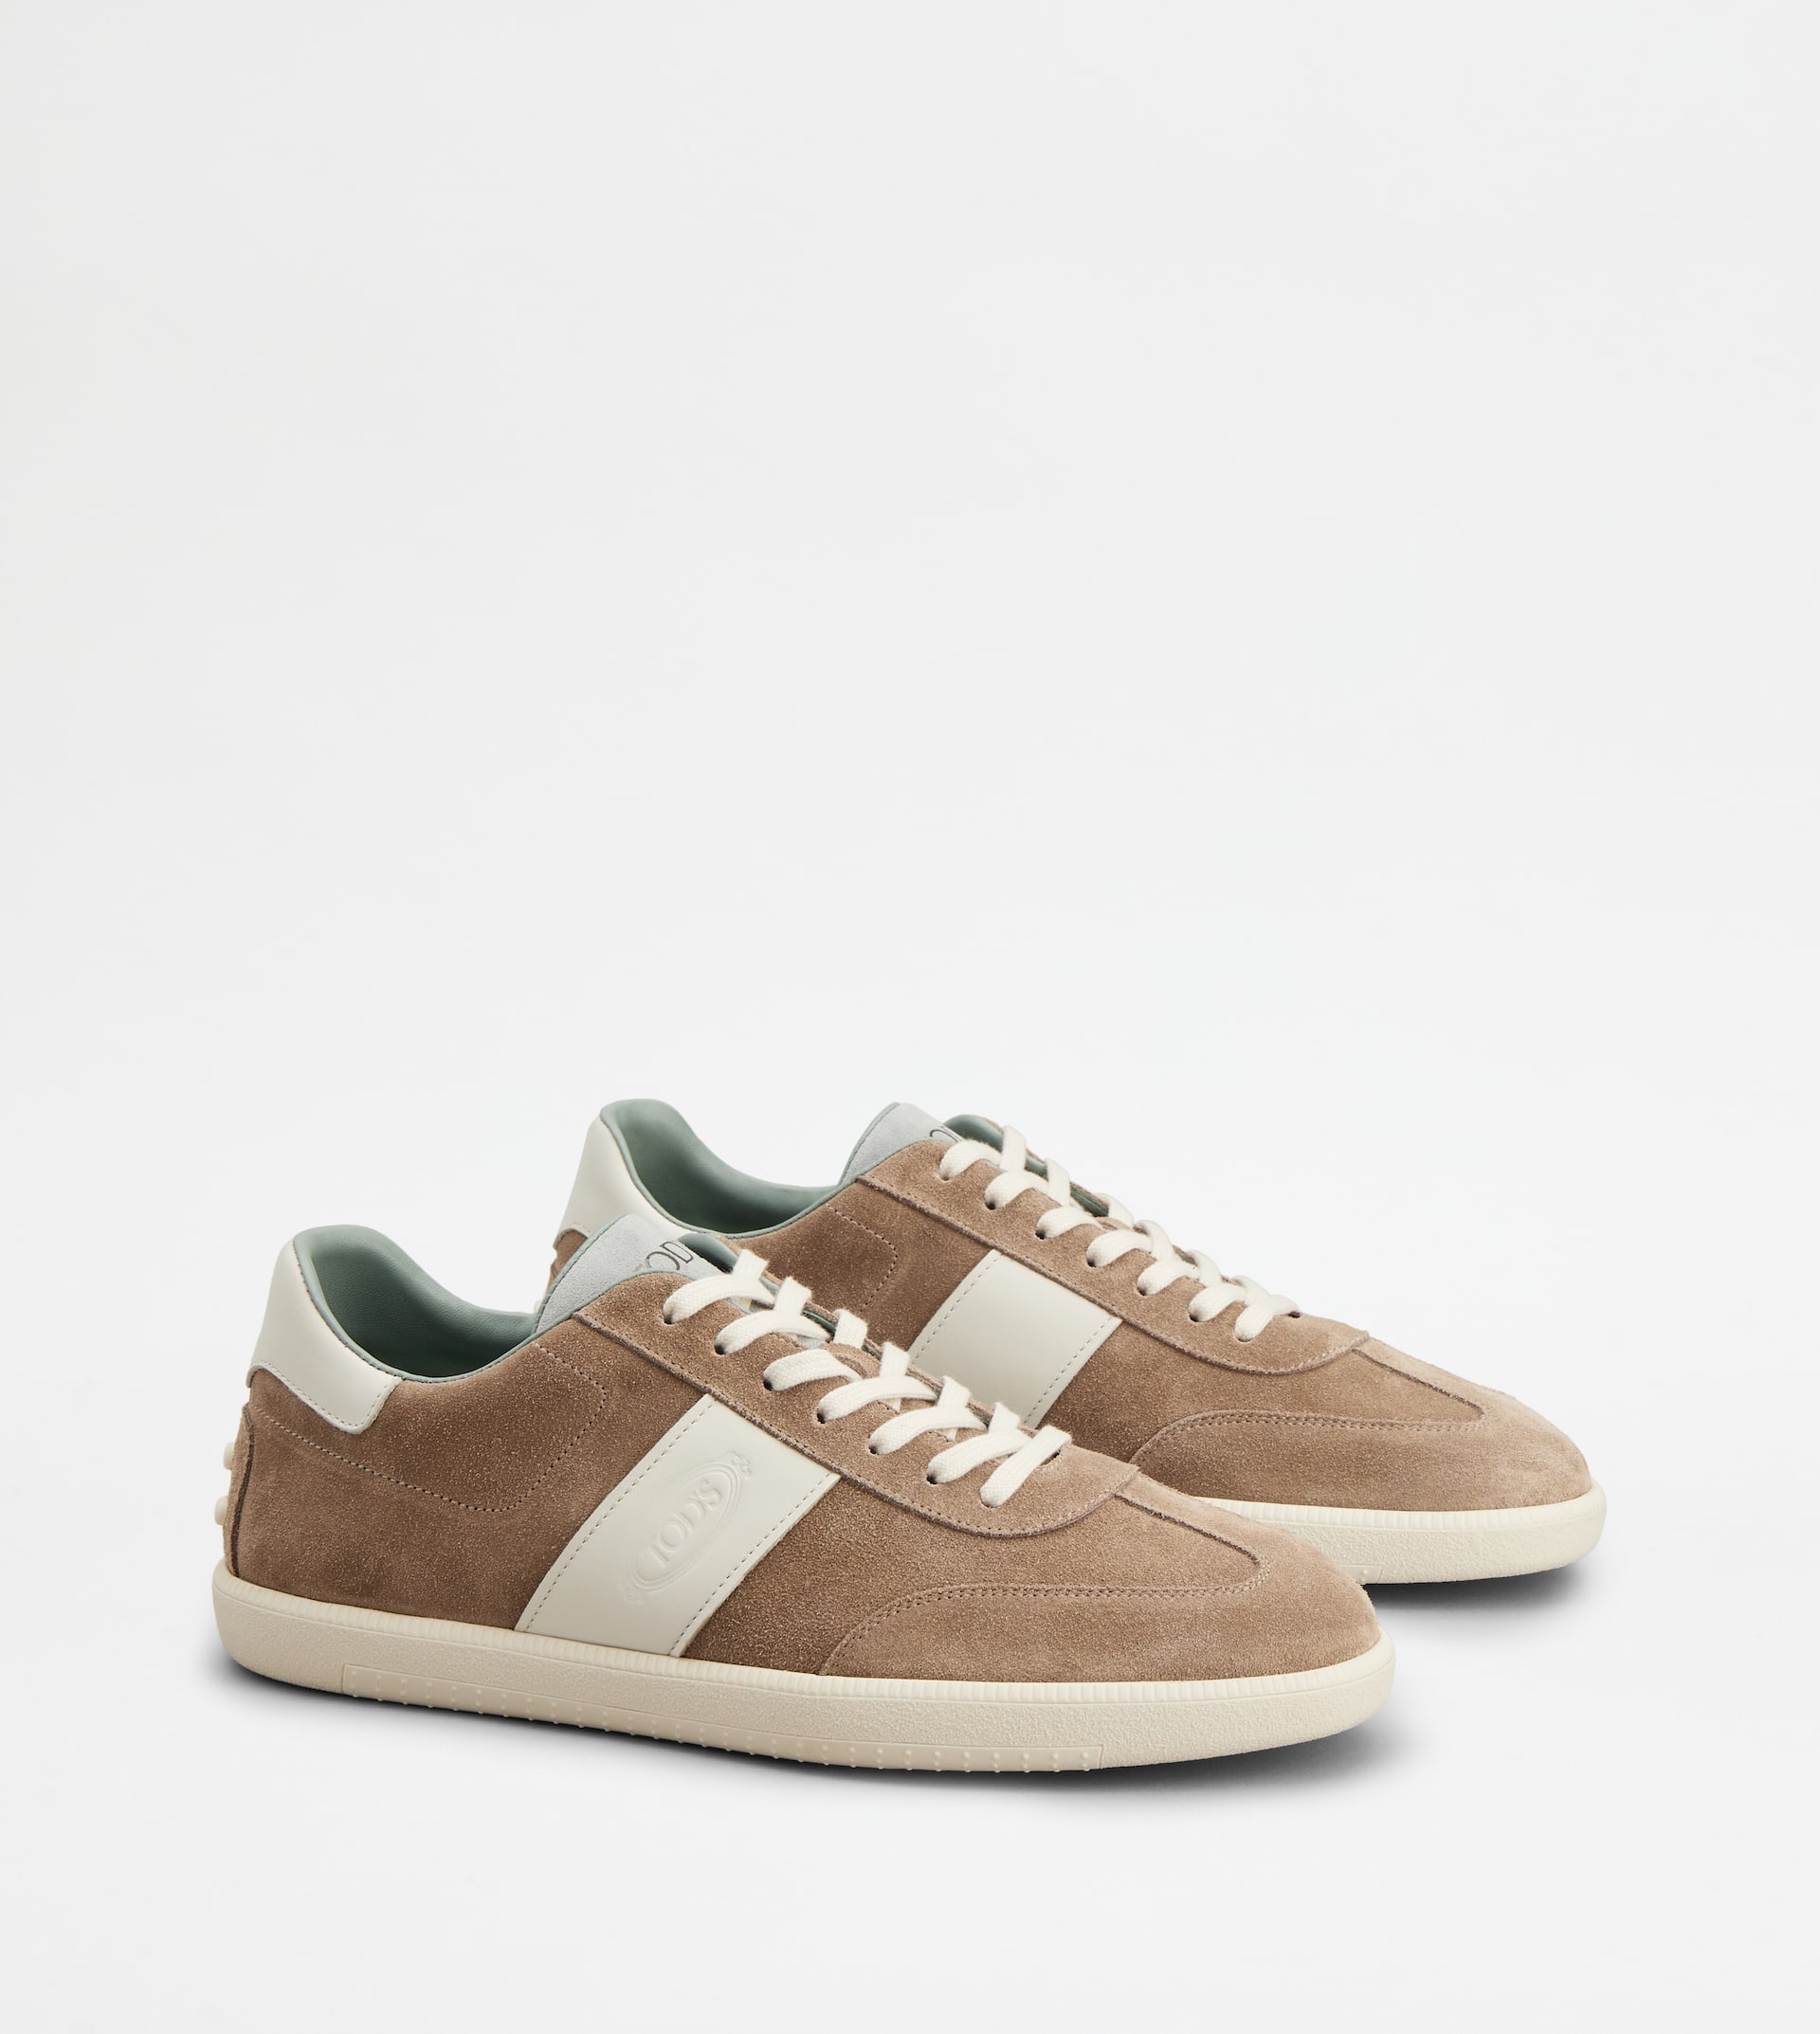 TOD'S TABS SNEAKERS IN SUEDE - BROWN, WHITE, LIGHT BLUE - 3